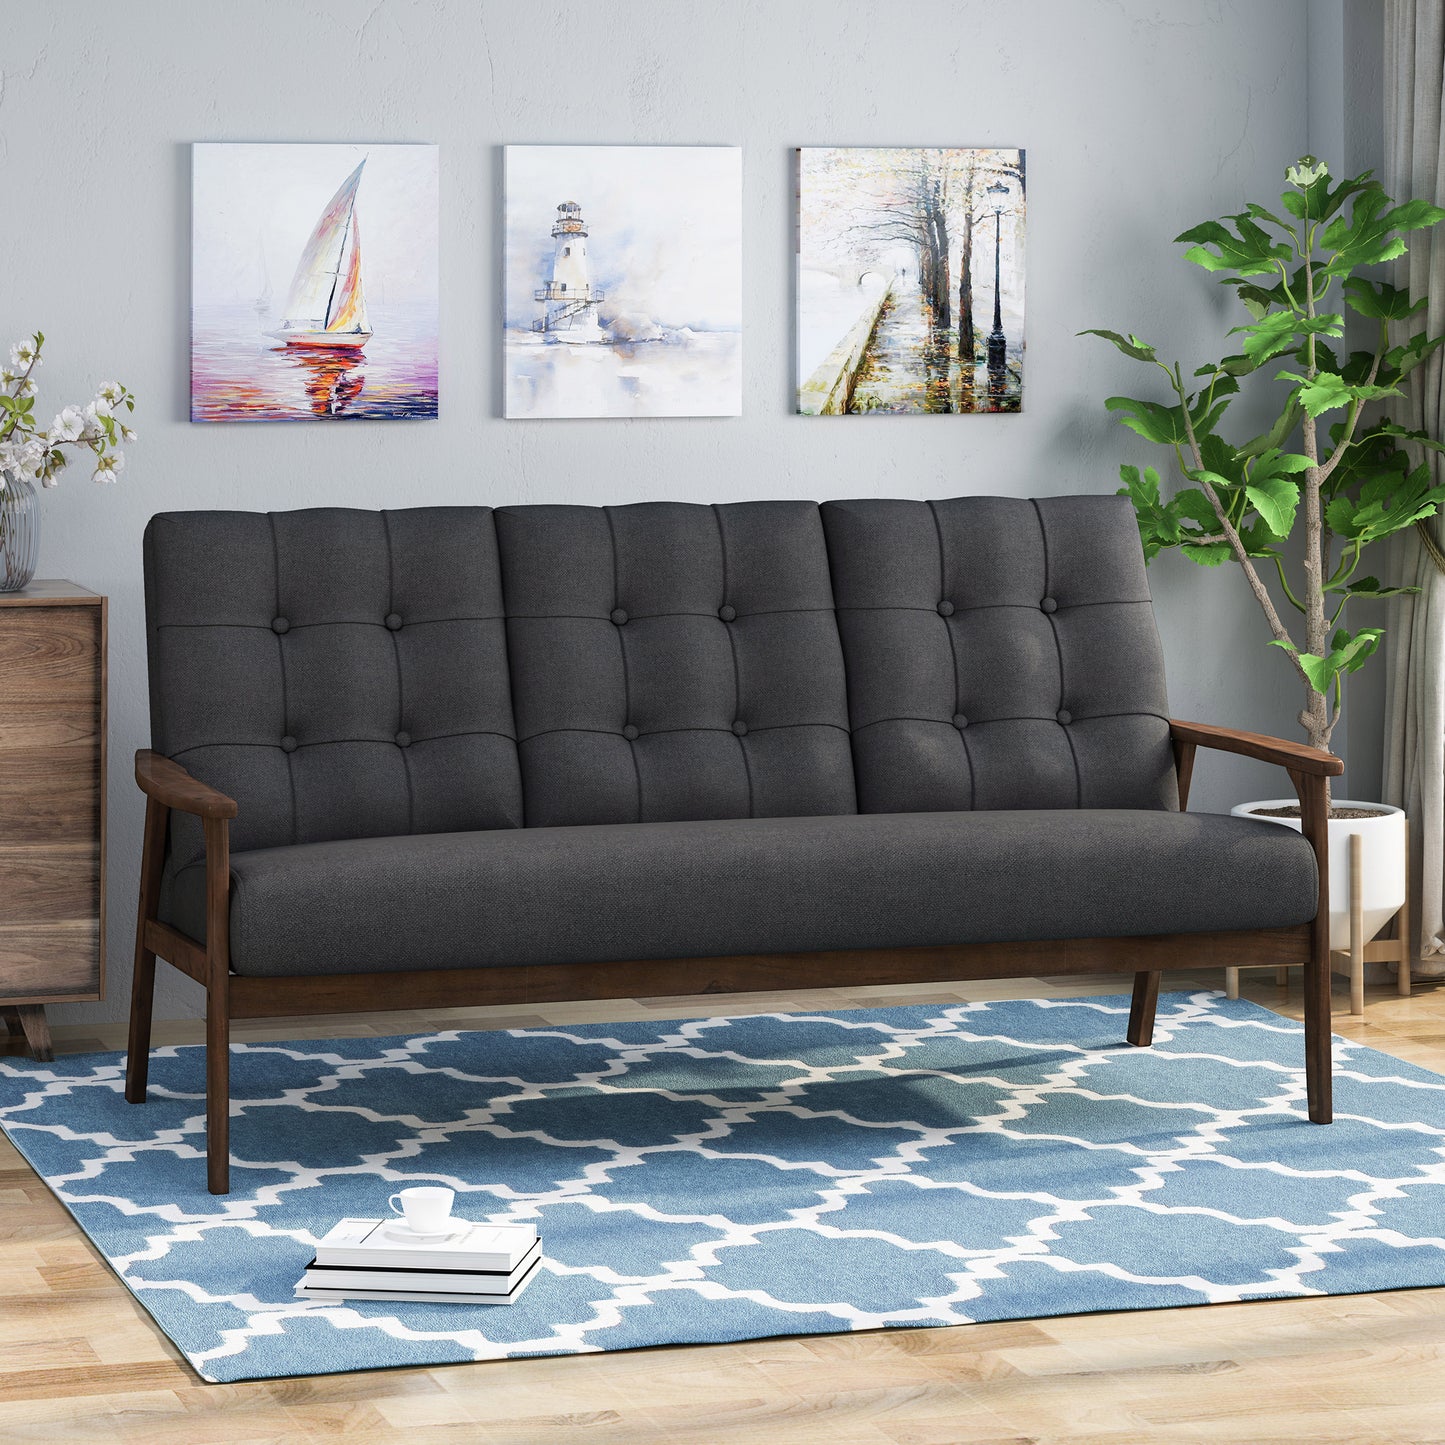 Samulle Mid Century Waffle Stitch Tufted Accent Sofa with Rubberwood Legs - Black and Walnut Finish